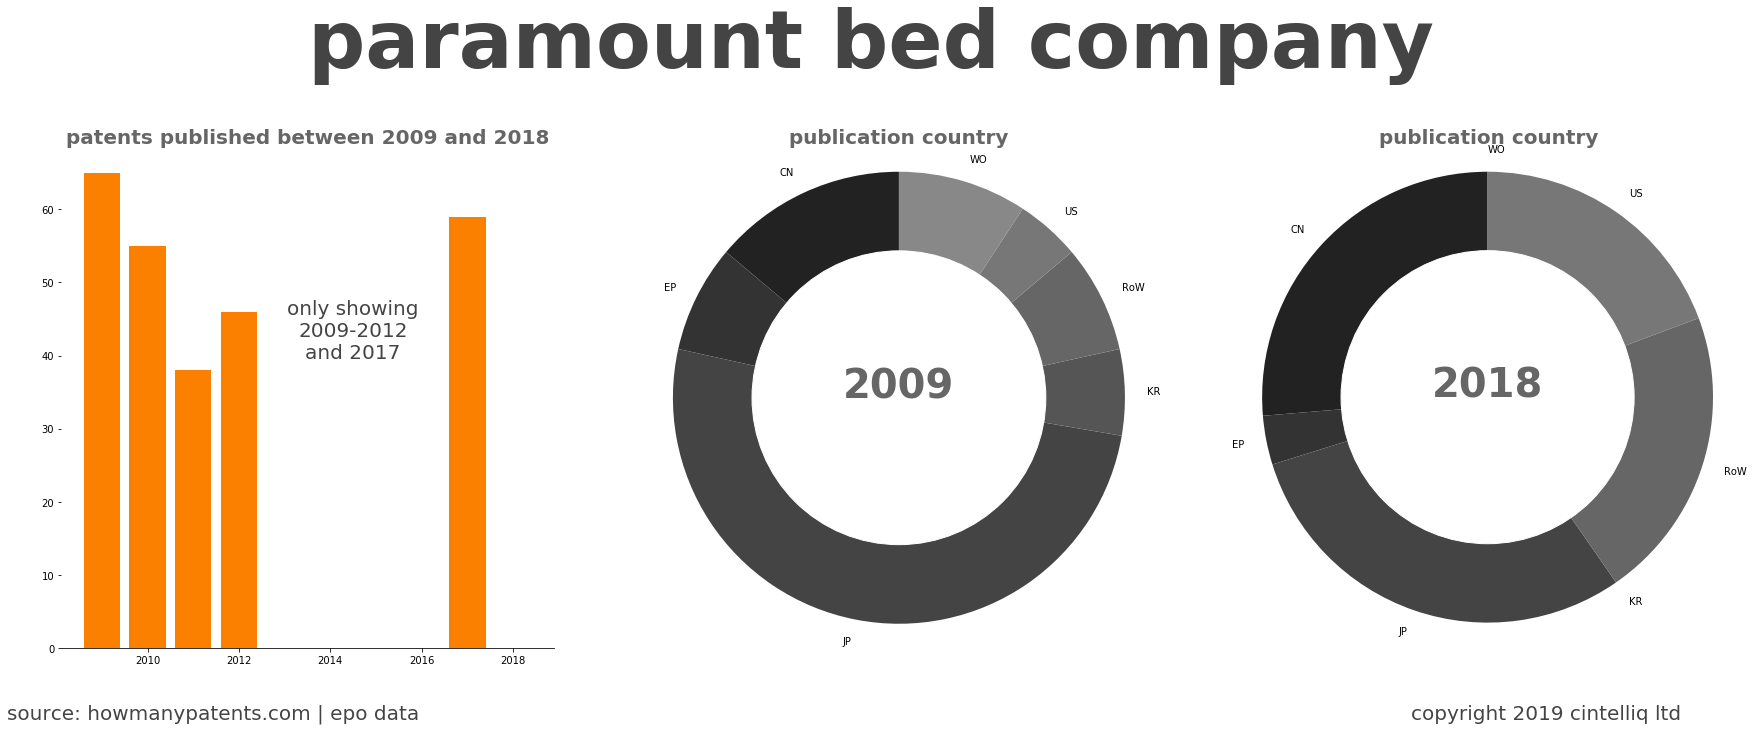 summary of patents for Paramount Bed Company